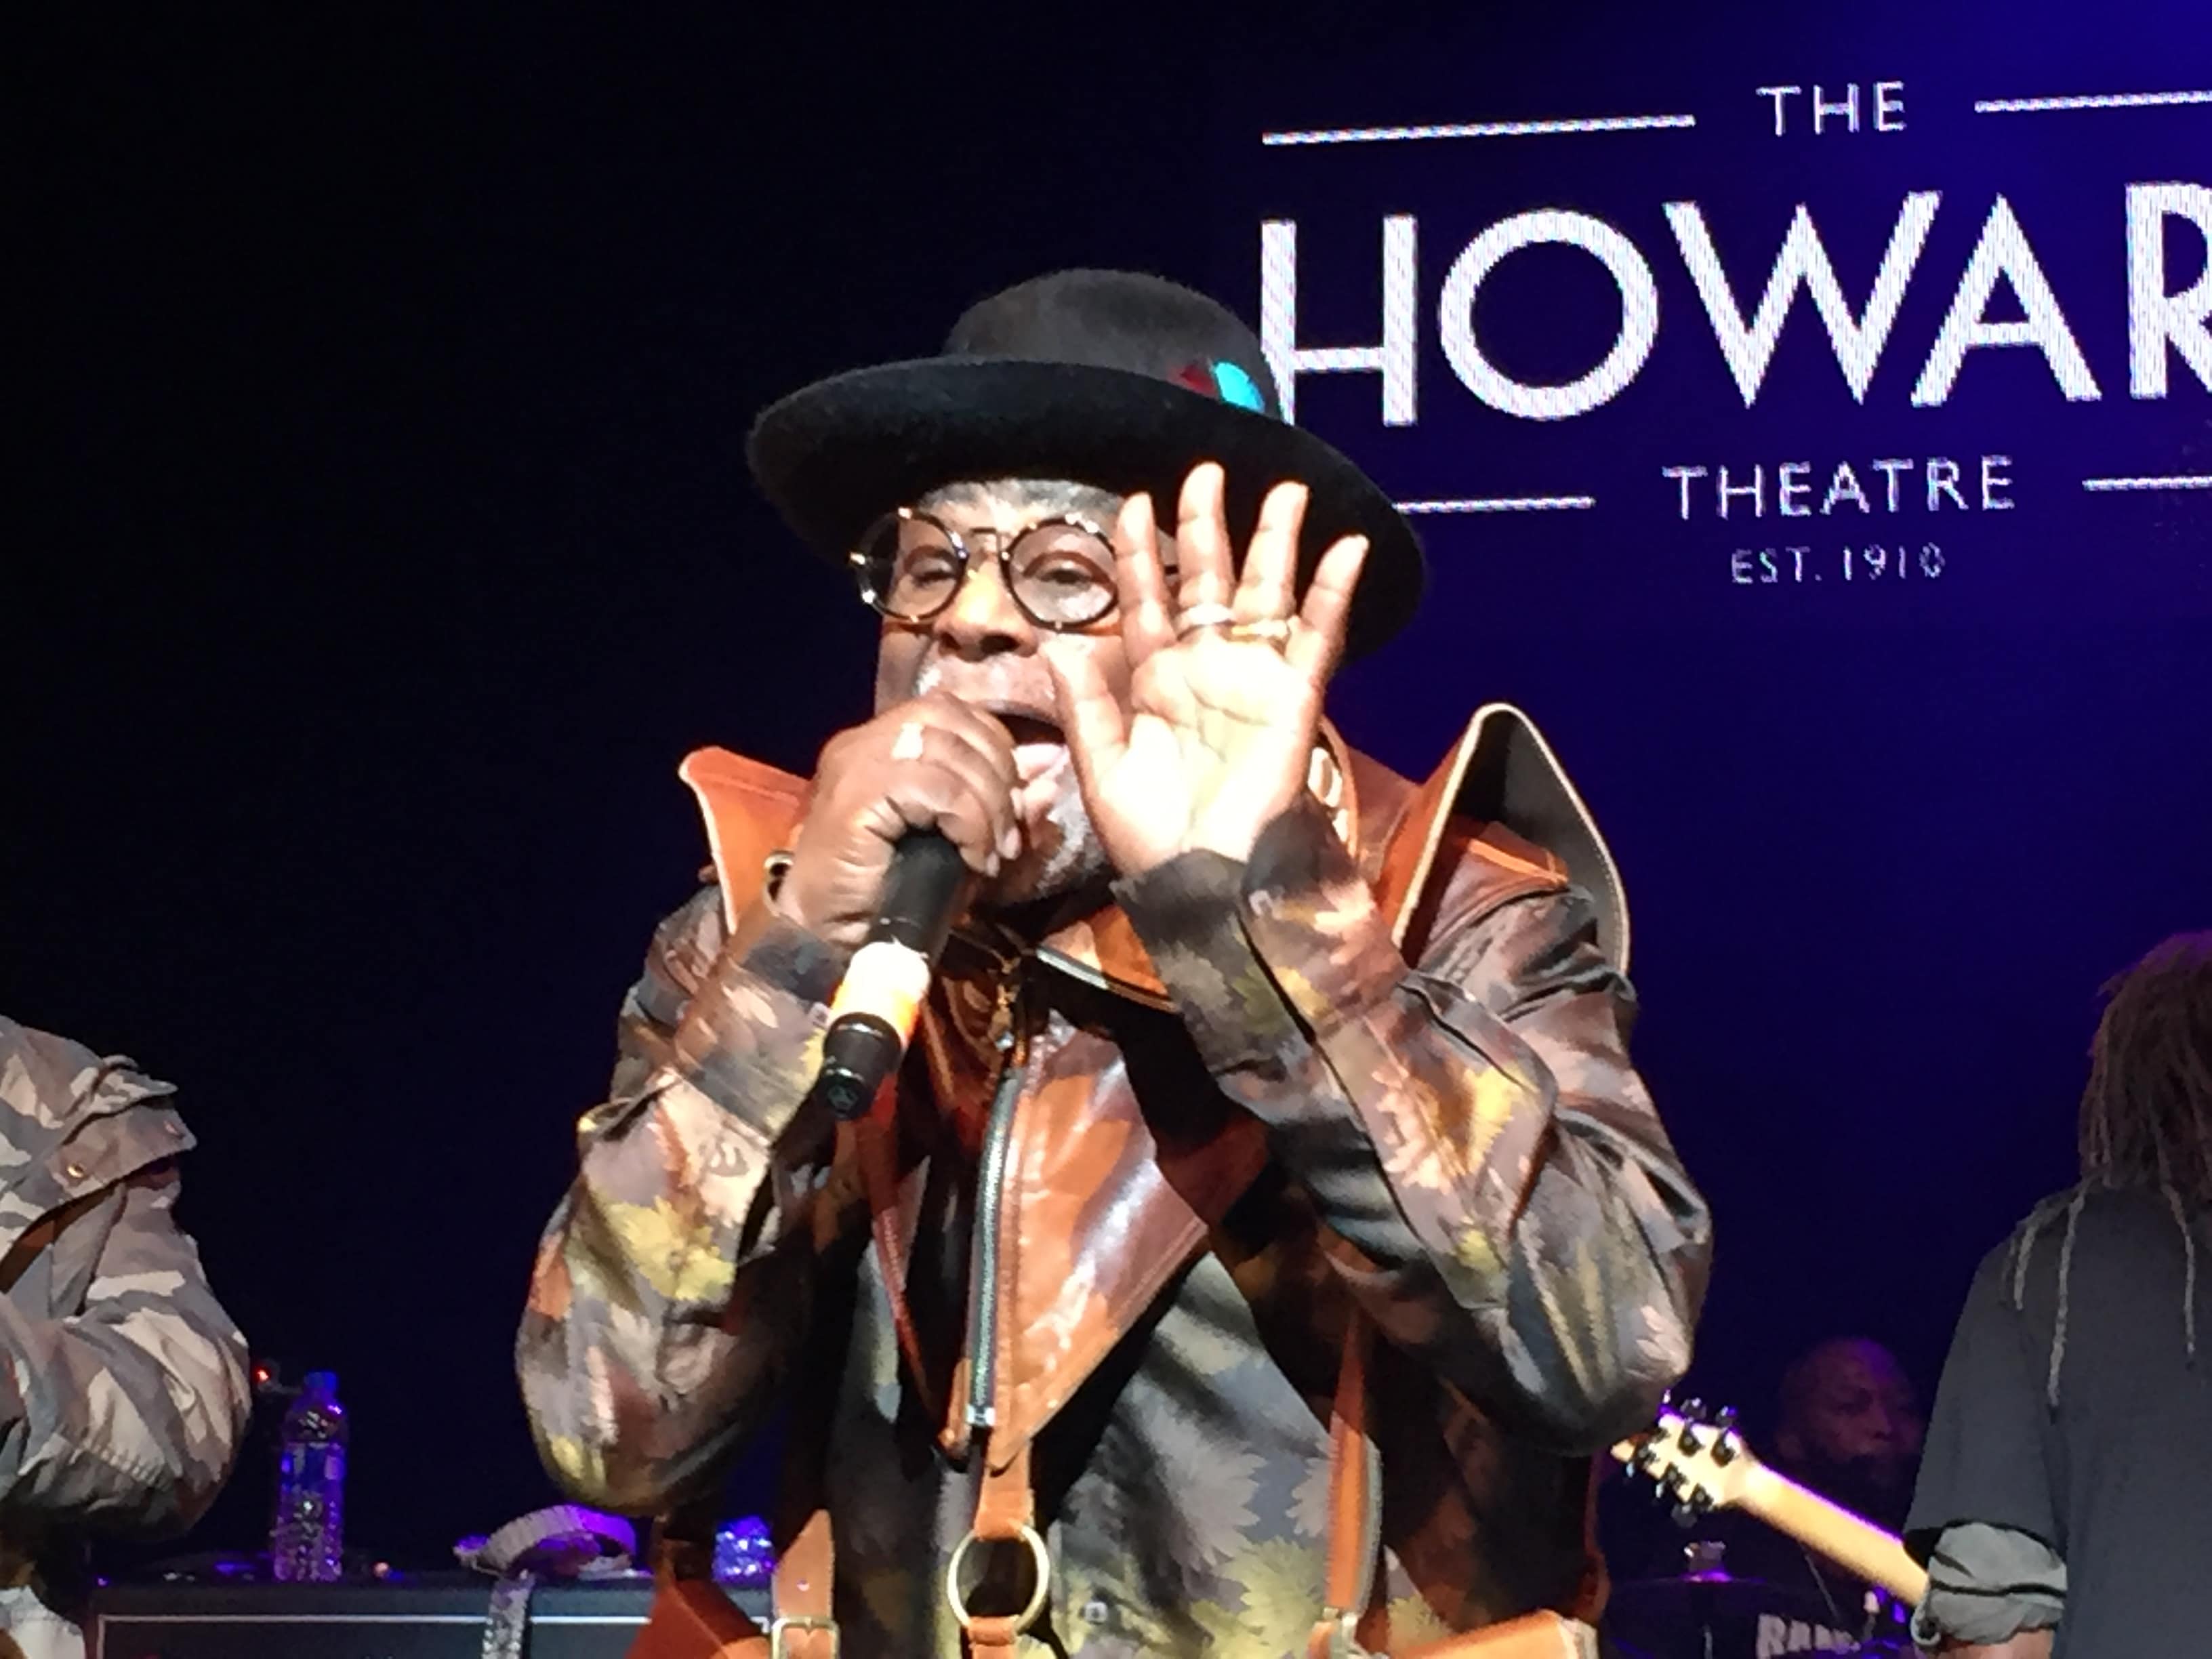 George Clinton performing with Parliament Funkadelic at the Howard Theatre, February 15, 2018. Photo by William Powell. 